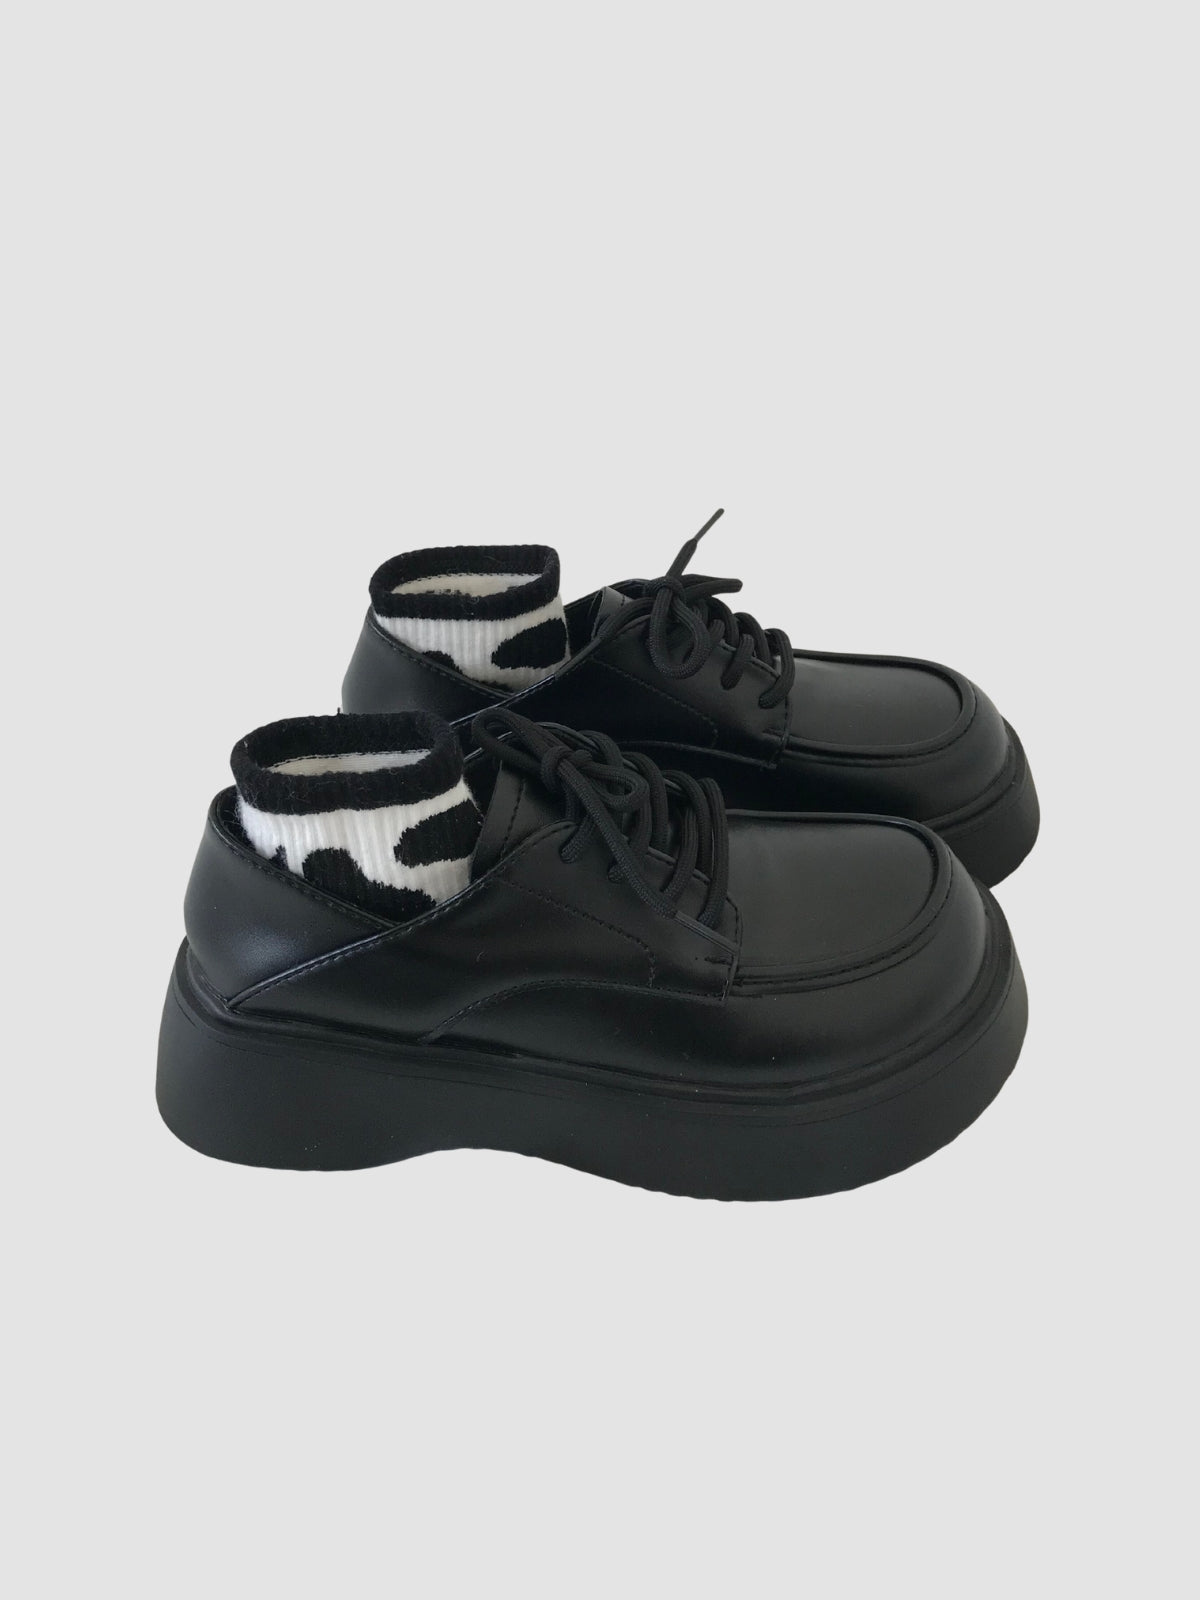 WLS Lace Up Leather Women Loafers Shoes